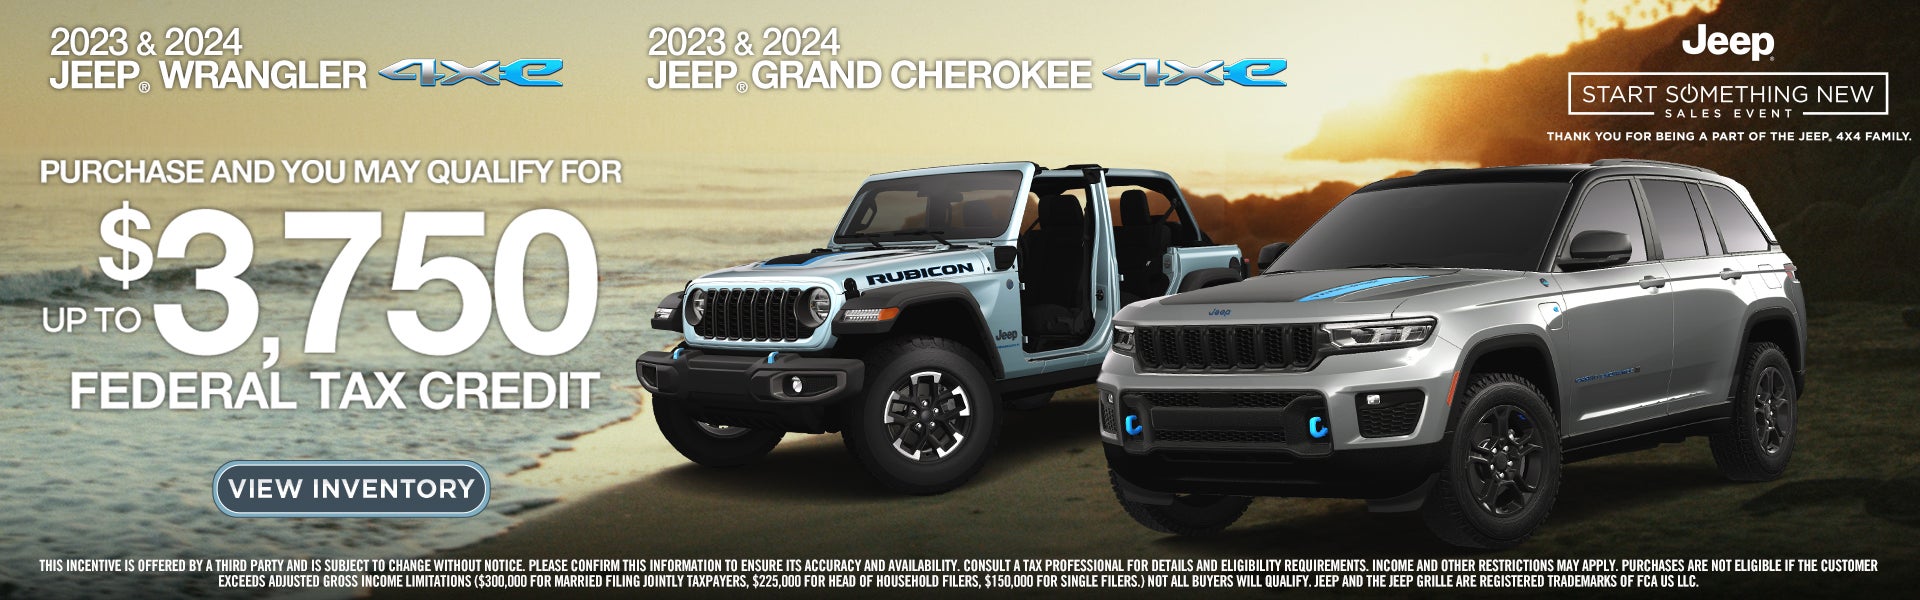 2023 & 24 Jeep Wrangler and Grand Cherokee Federal Tax Cred